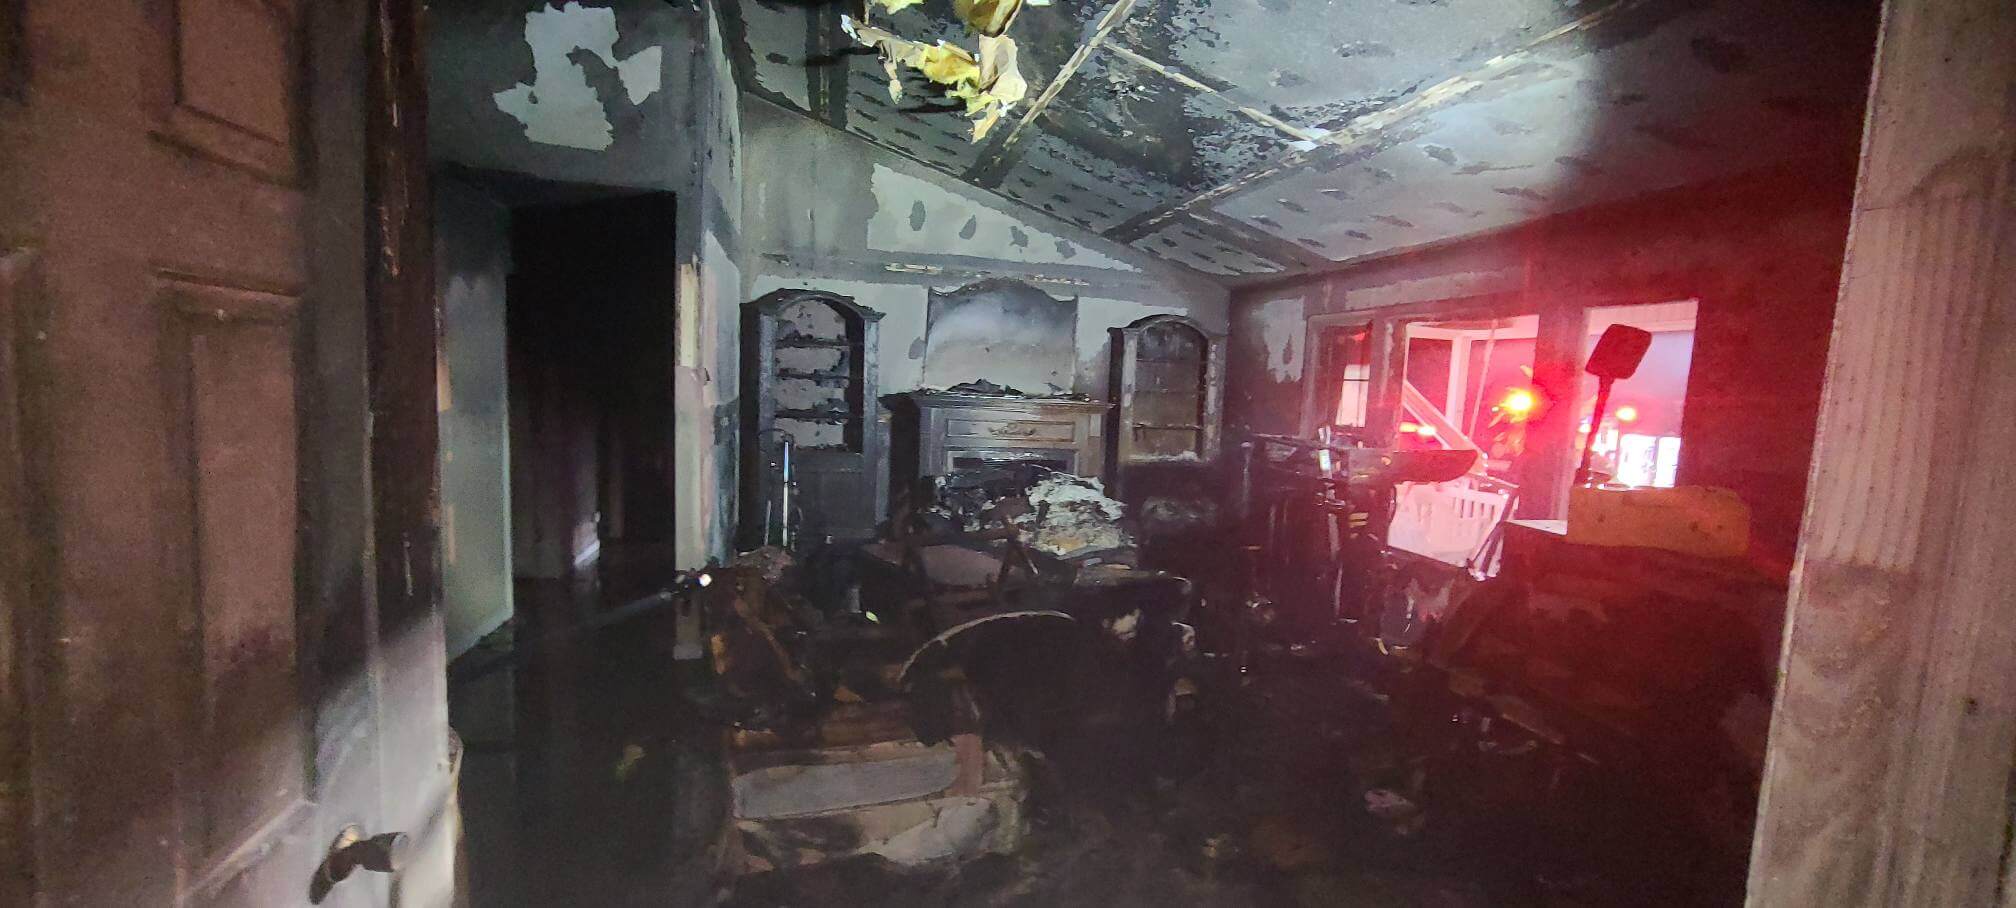 The fire that damaged a North Cape May home Sept. 28 was deemed accidental